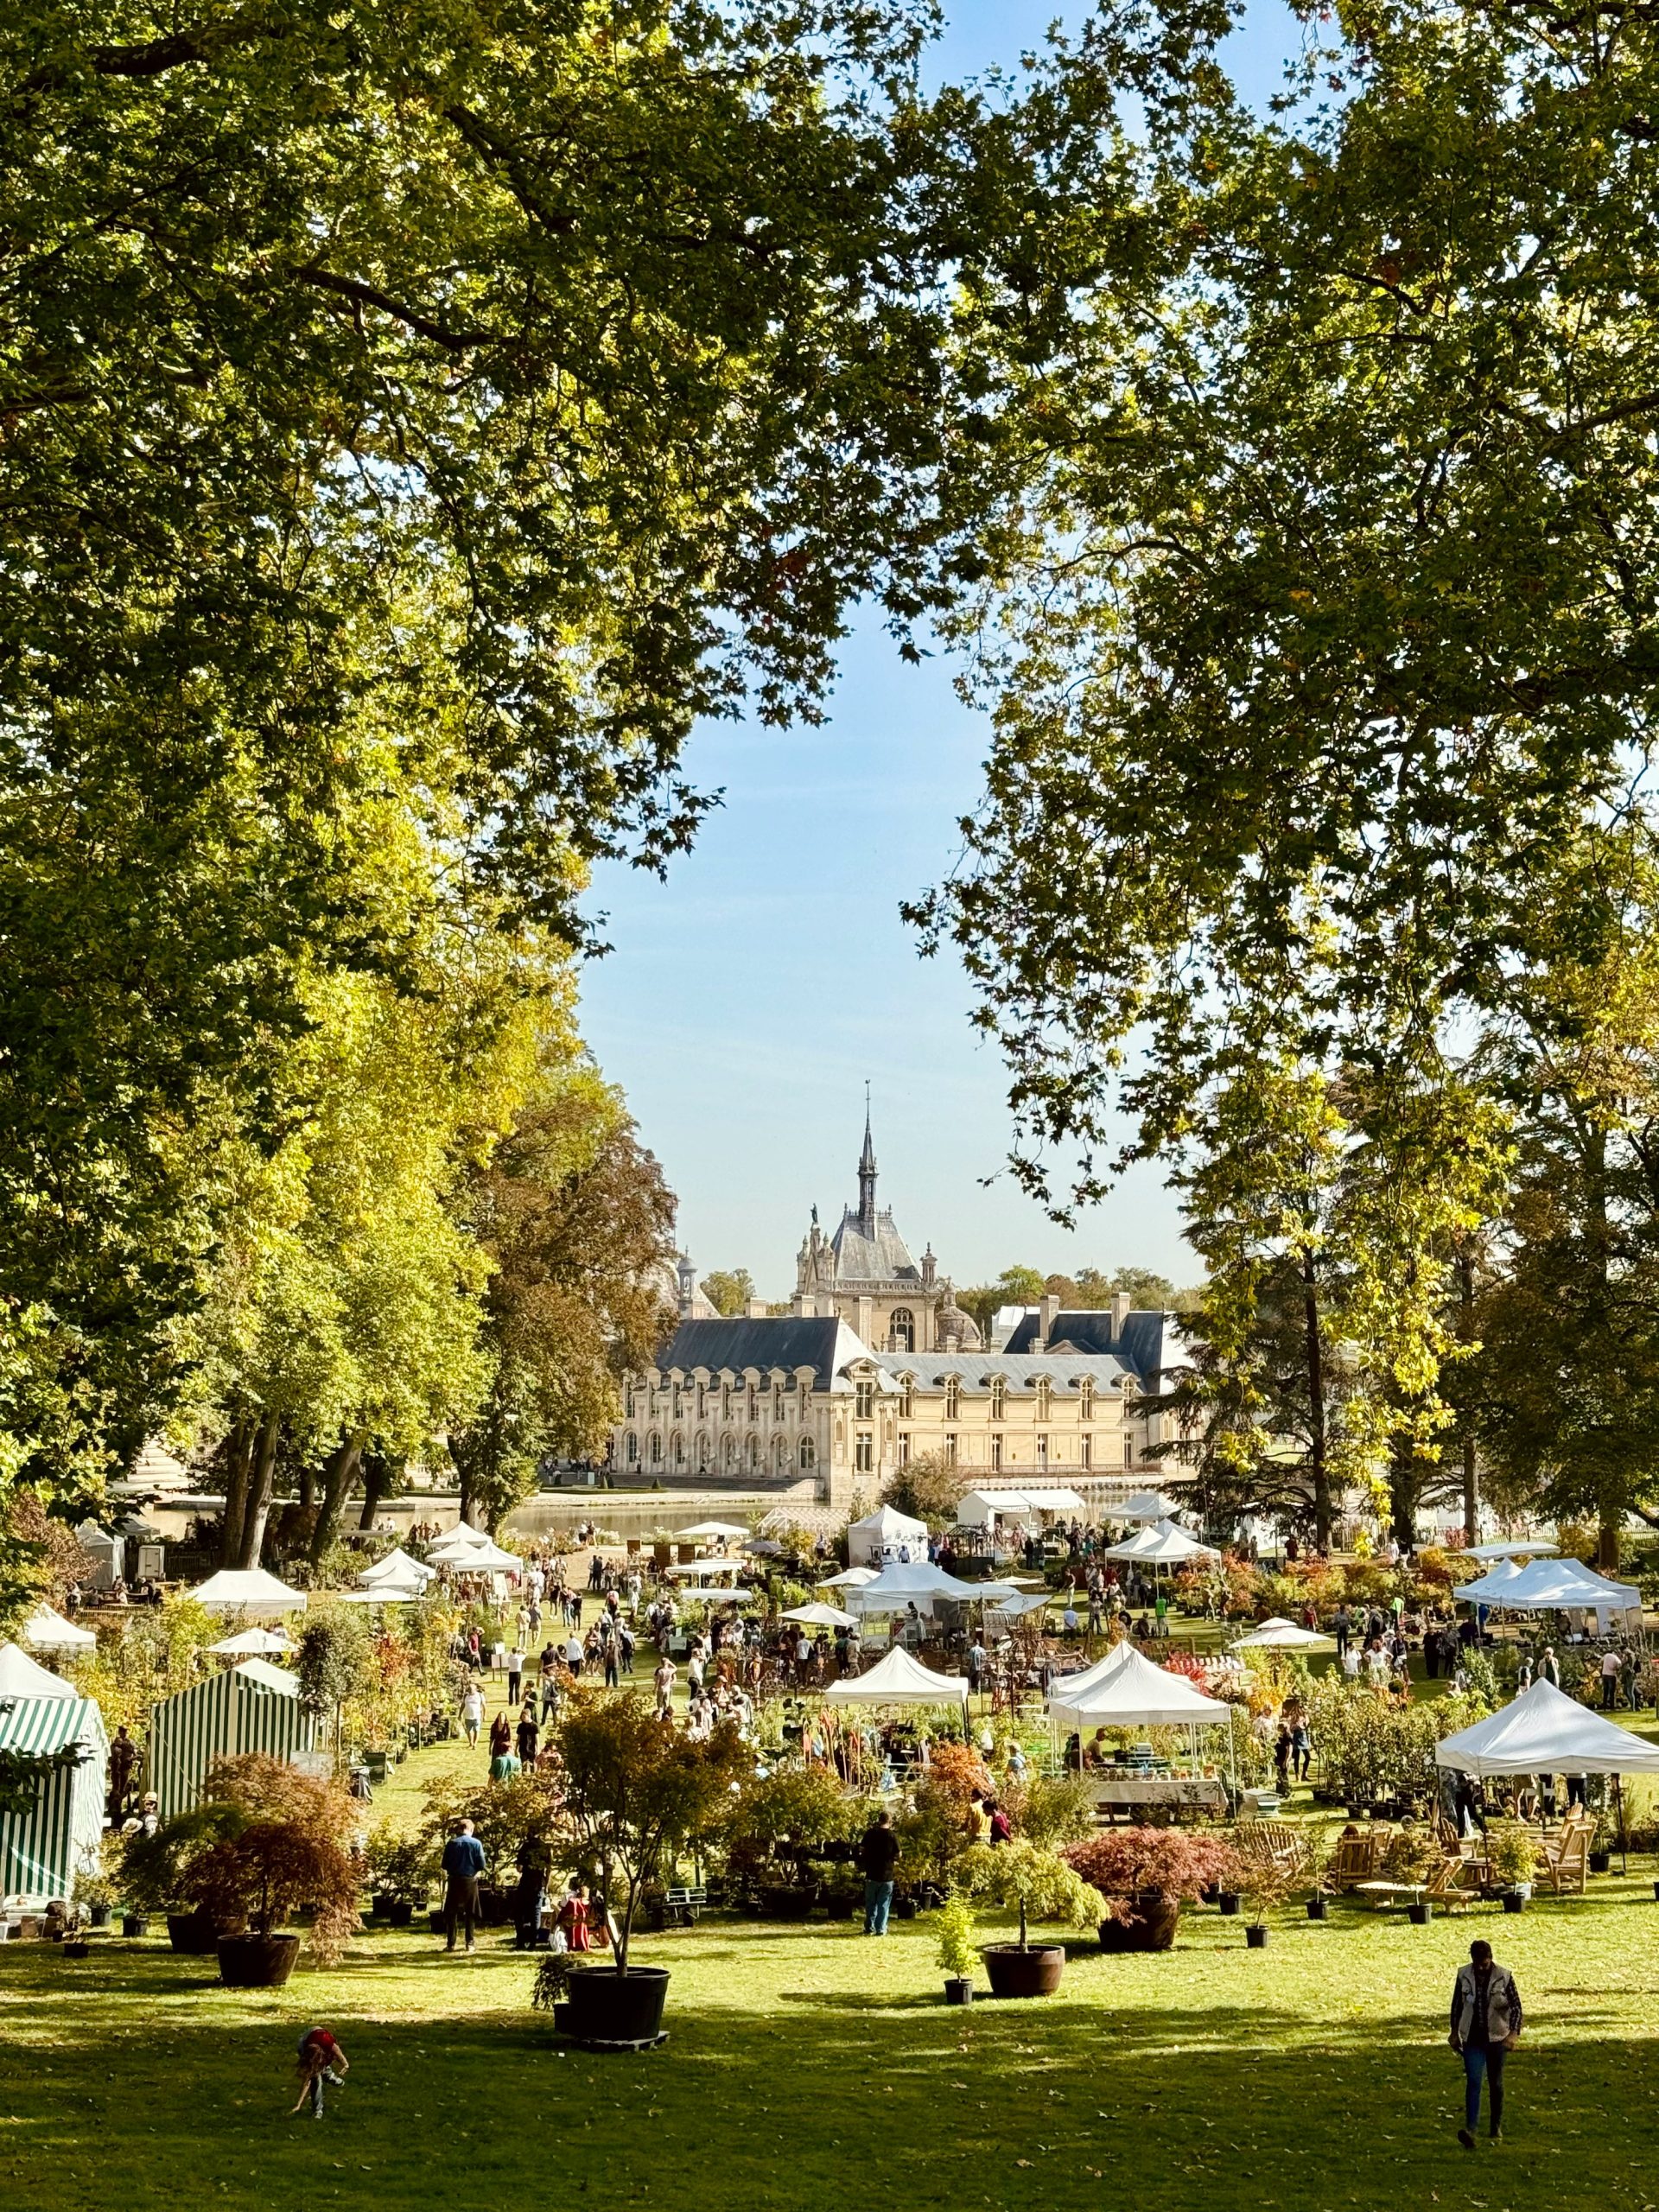 Have a French picnic in an exquisite vegetable garden adjacent to the Château de Chantilly